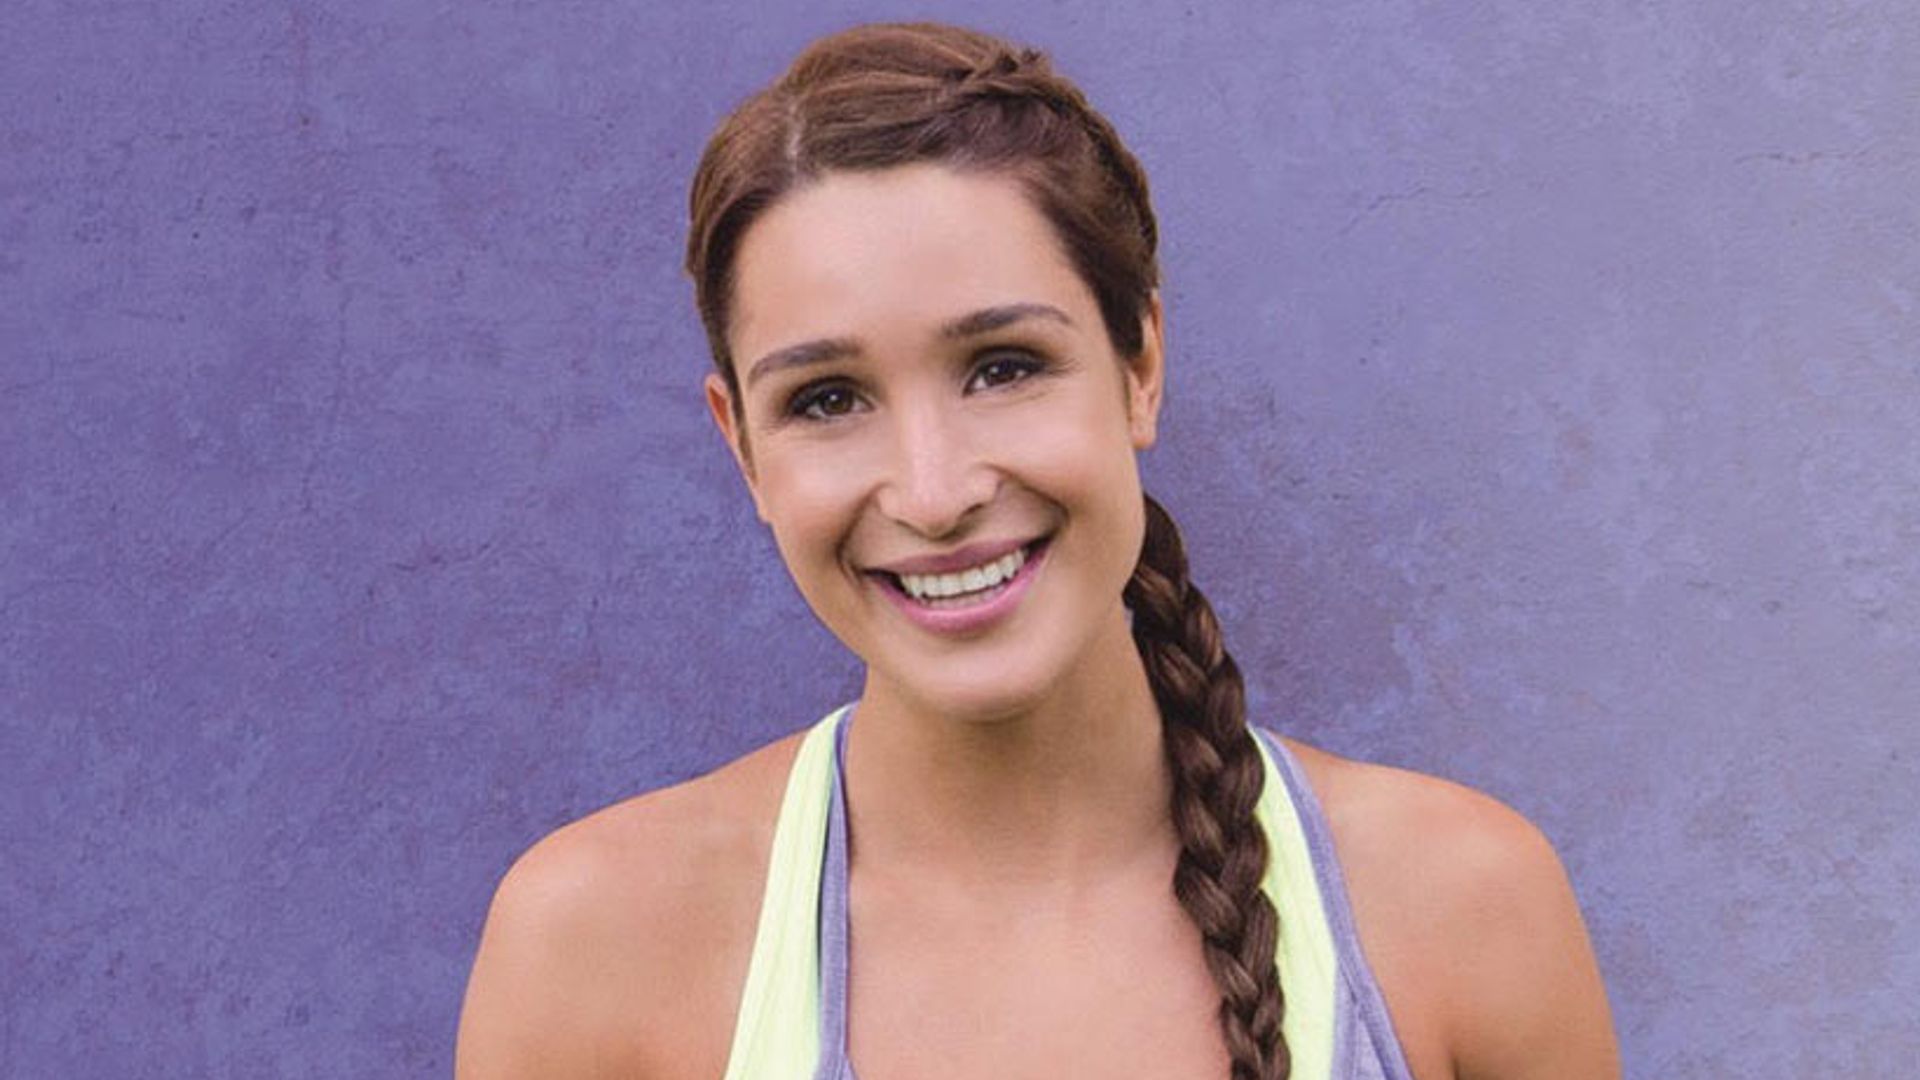 Kayla Itsines shares her fitness tips and reveals the one celebrity she'd love to train